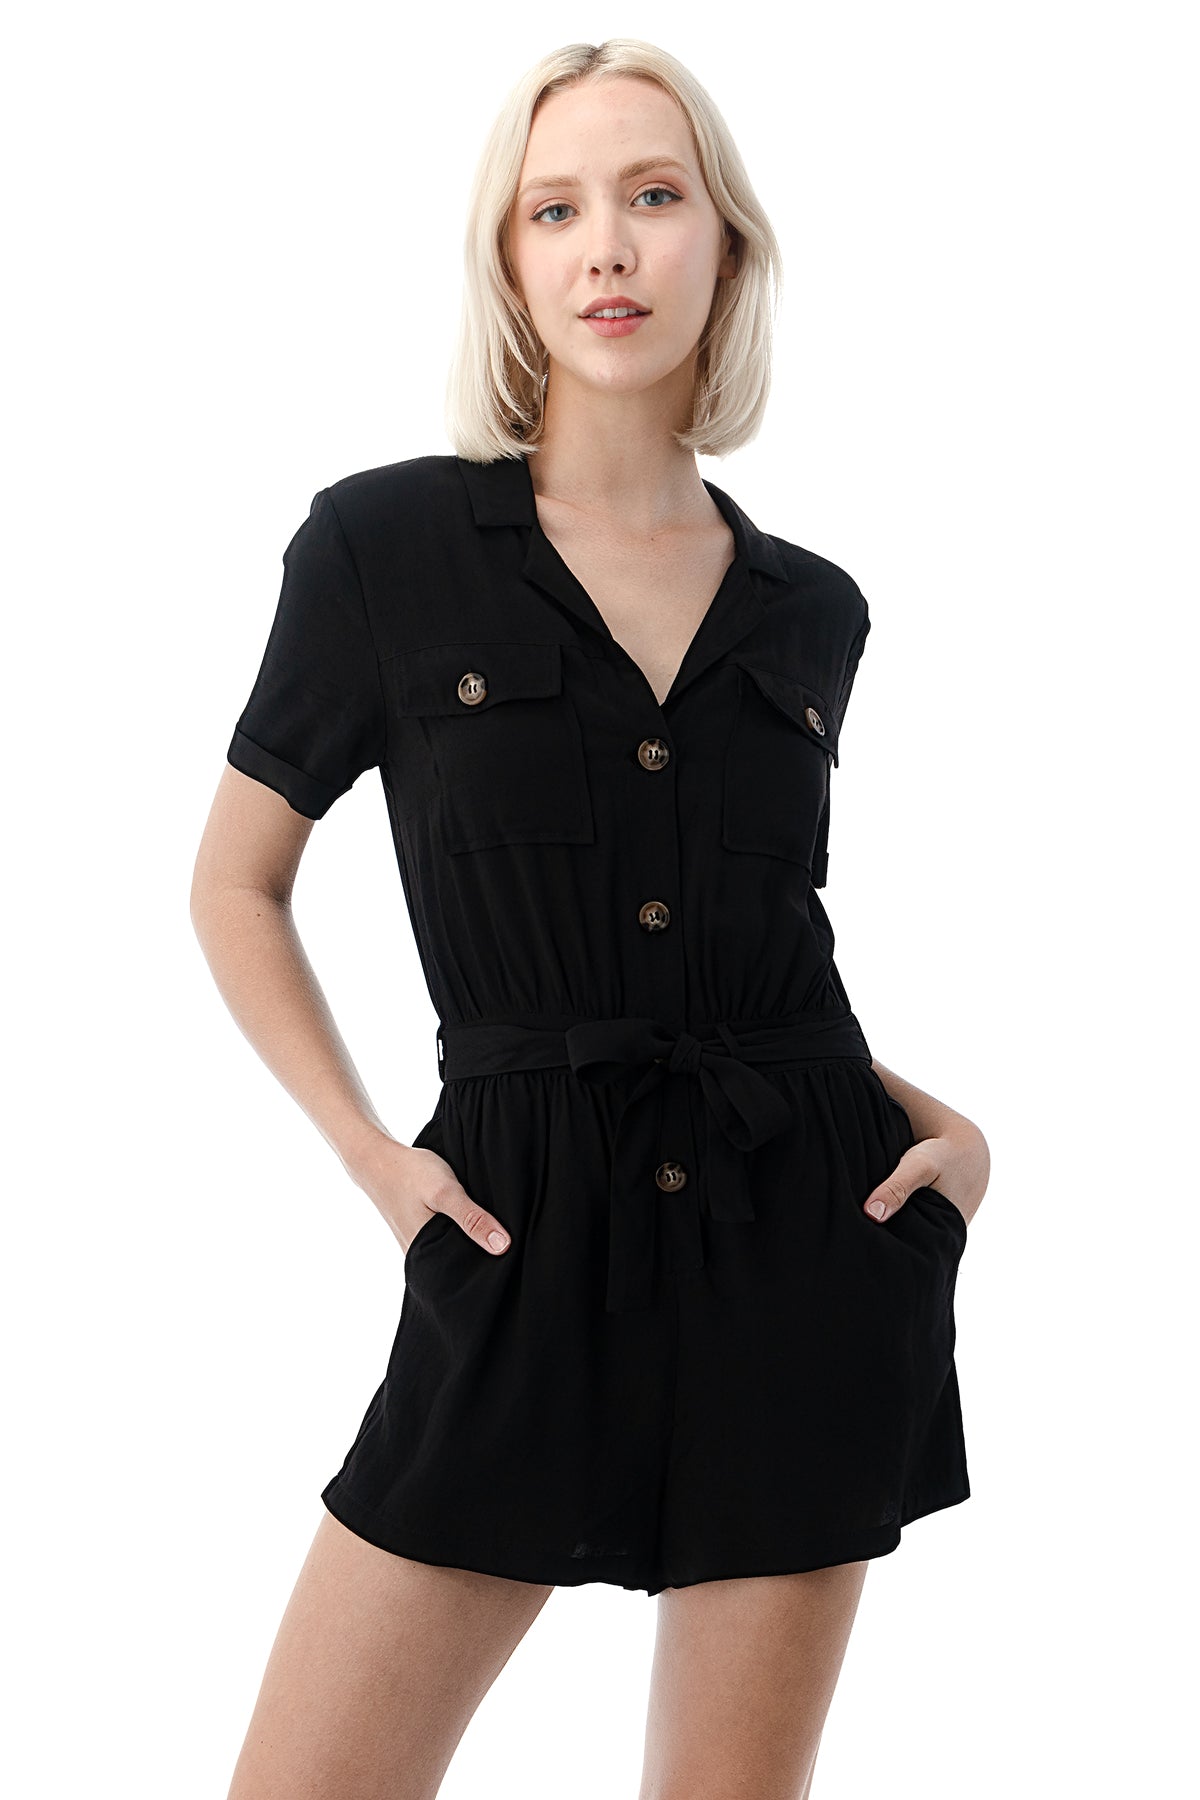 EDGY Land Girl's and Women's Casual Short Sleeve & Sleeveless Button Down Waist Tie Cargo Romper